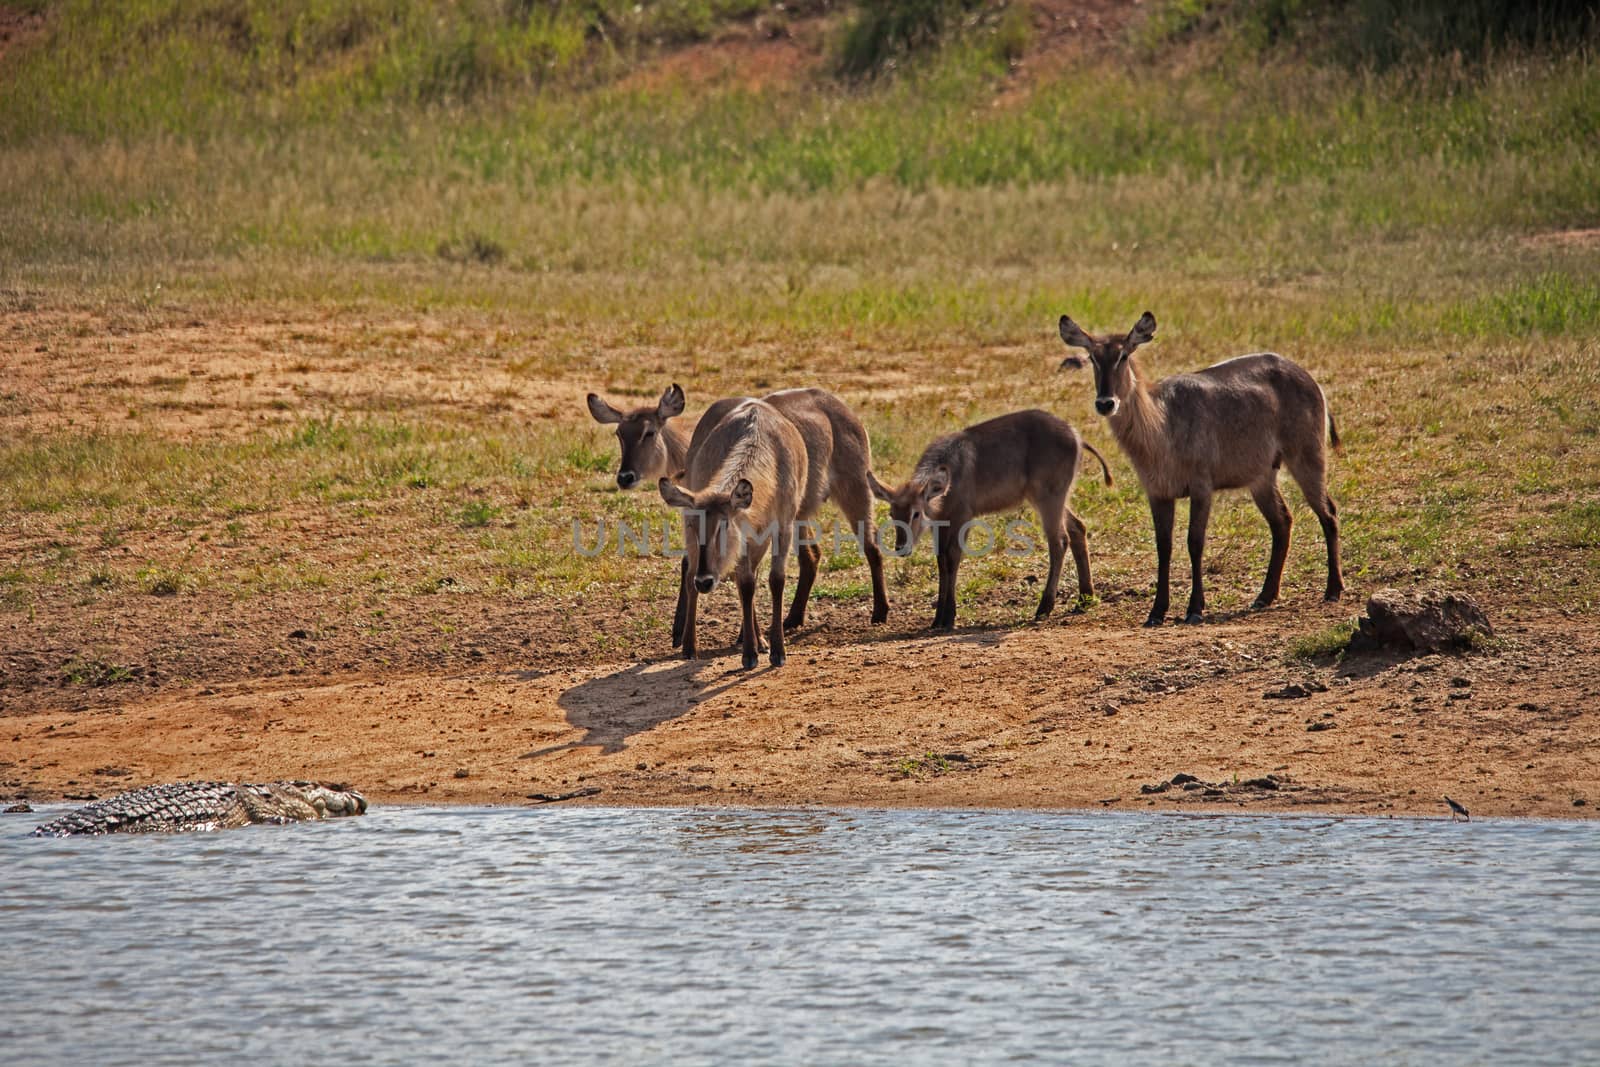 A group of Waterbuck (Kobus ellipsiprymnus) intently watching a Nile Crocodile (Crocodylus niloticus) in the water.